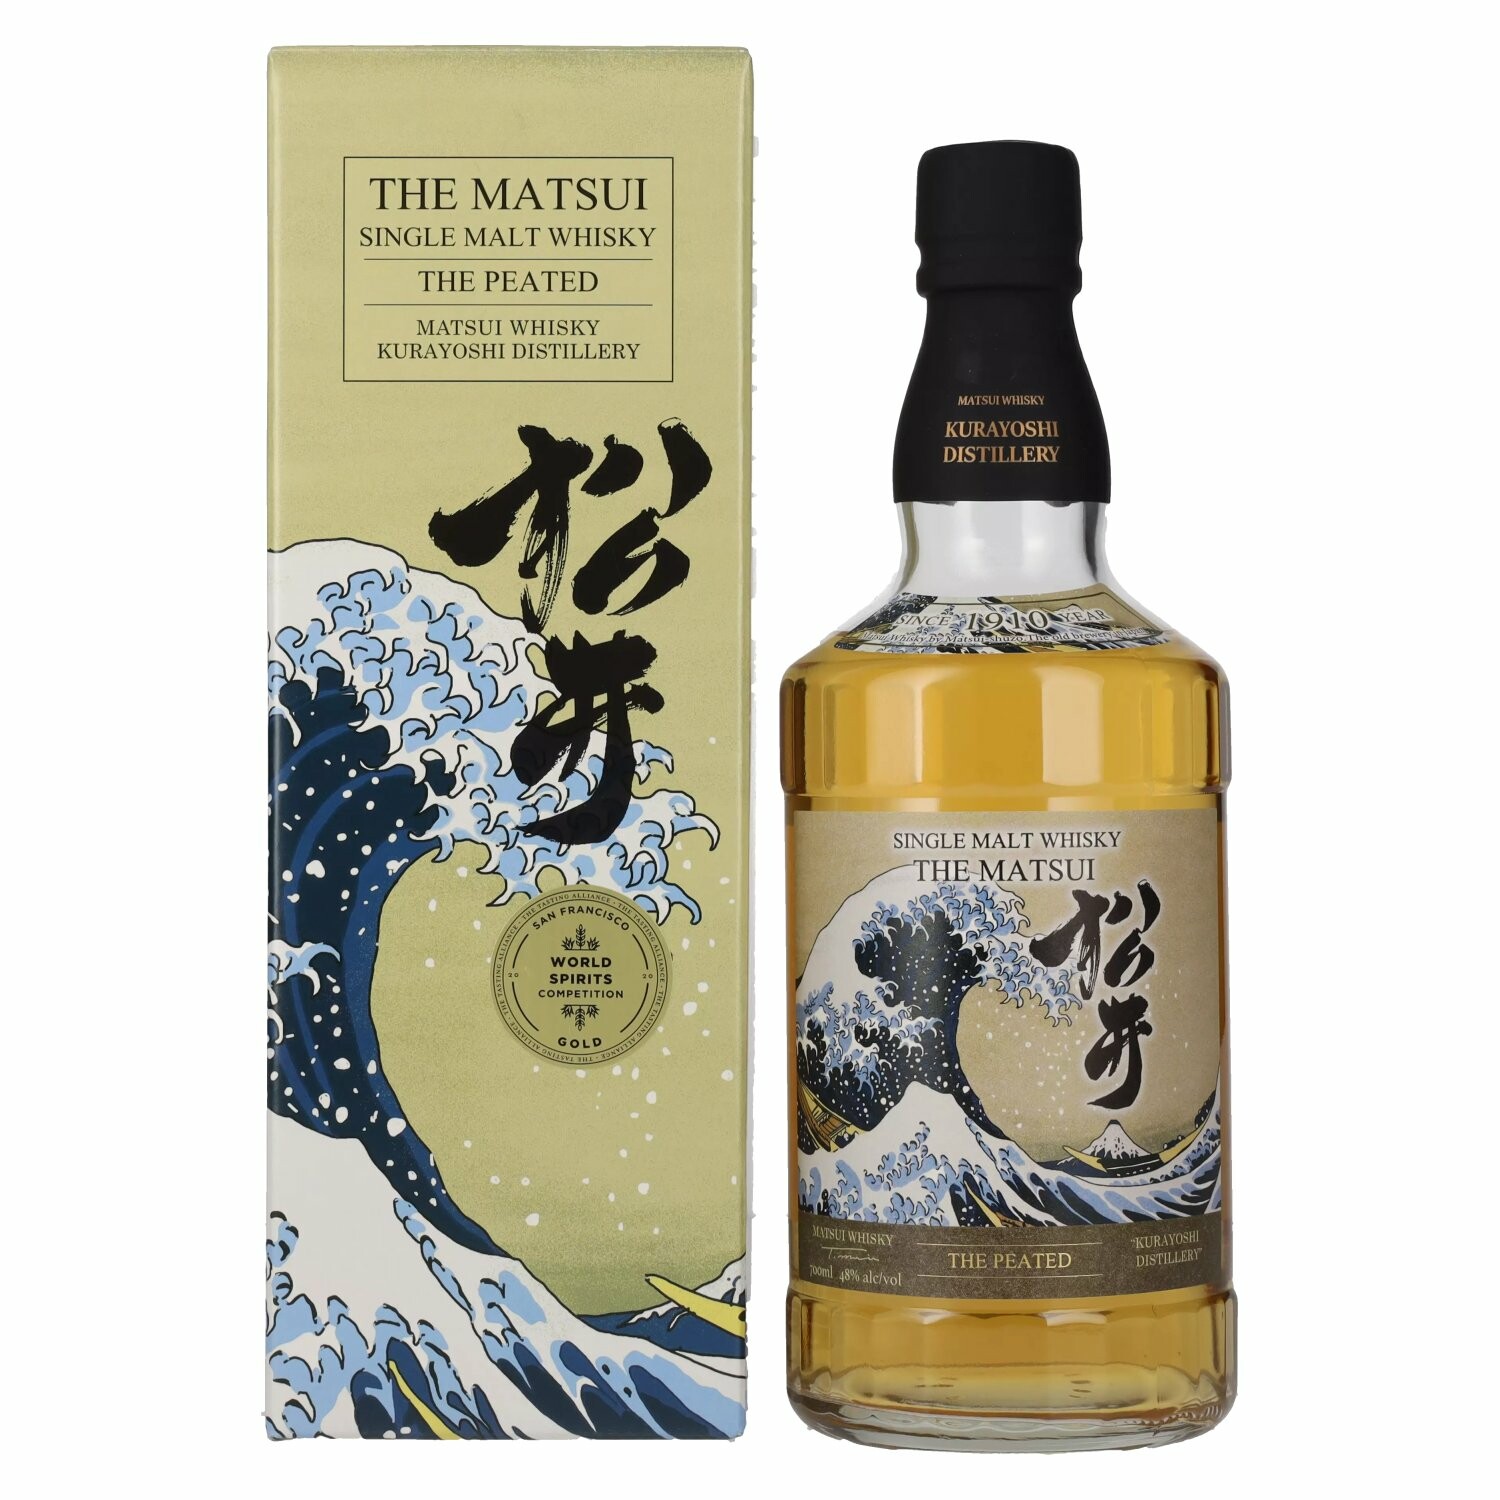 Matsui Whisky THE MATSUI Single Malt Japanese Whisky THE PEATED CASK 48% Vol. 0,7l in Giftbox